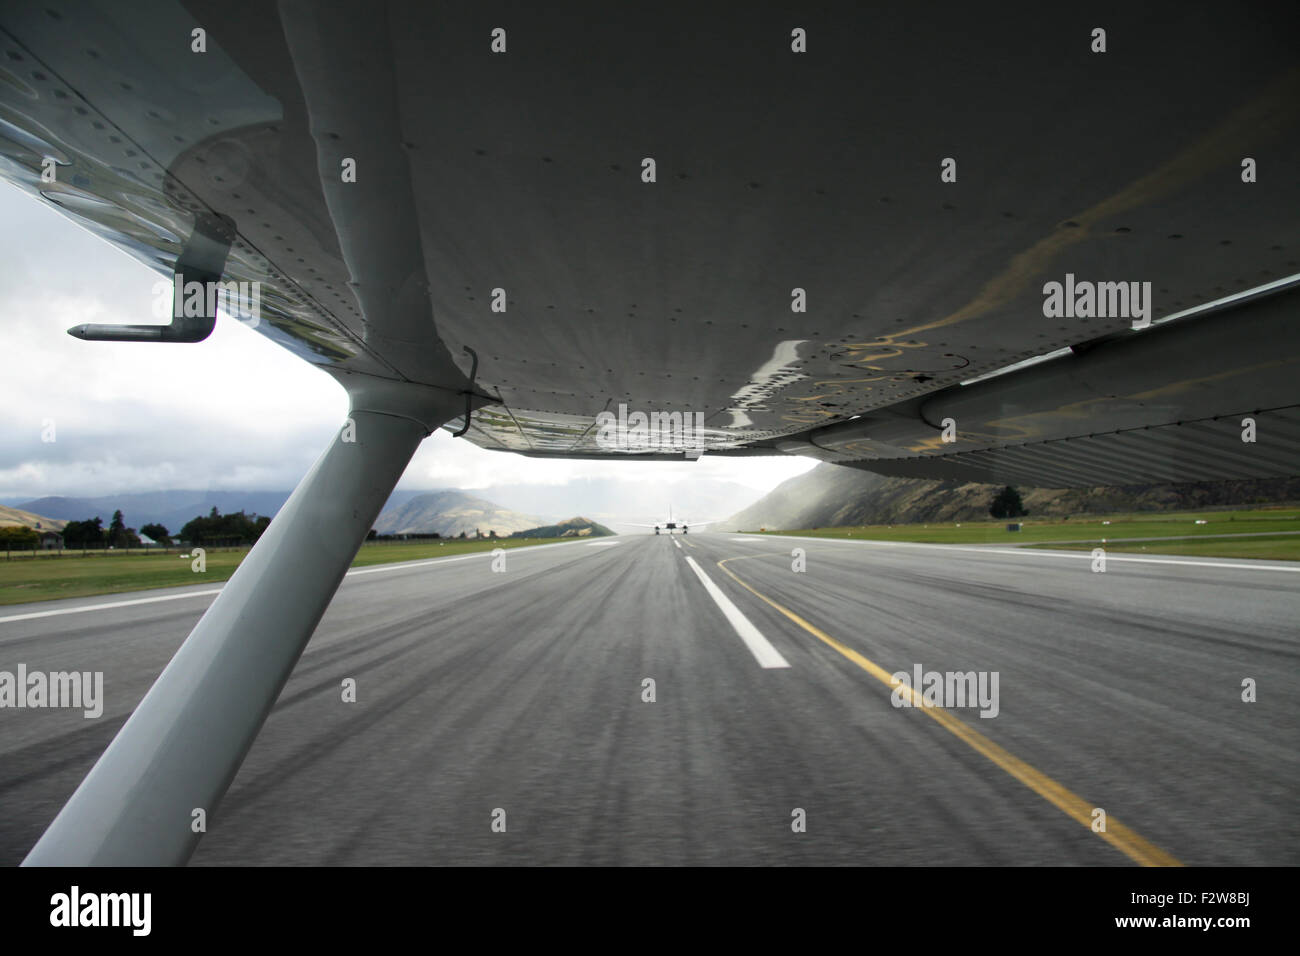 Under the wing of a small plane, taking off in Queenstown Airport, New Zealand. Stock Photo